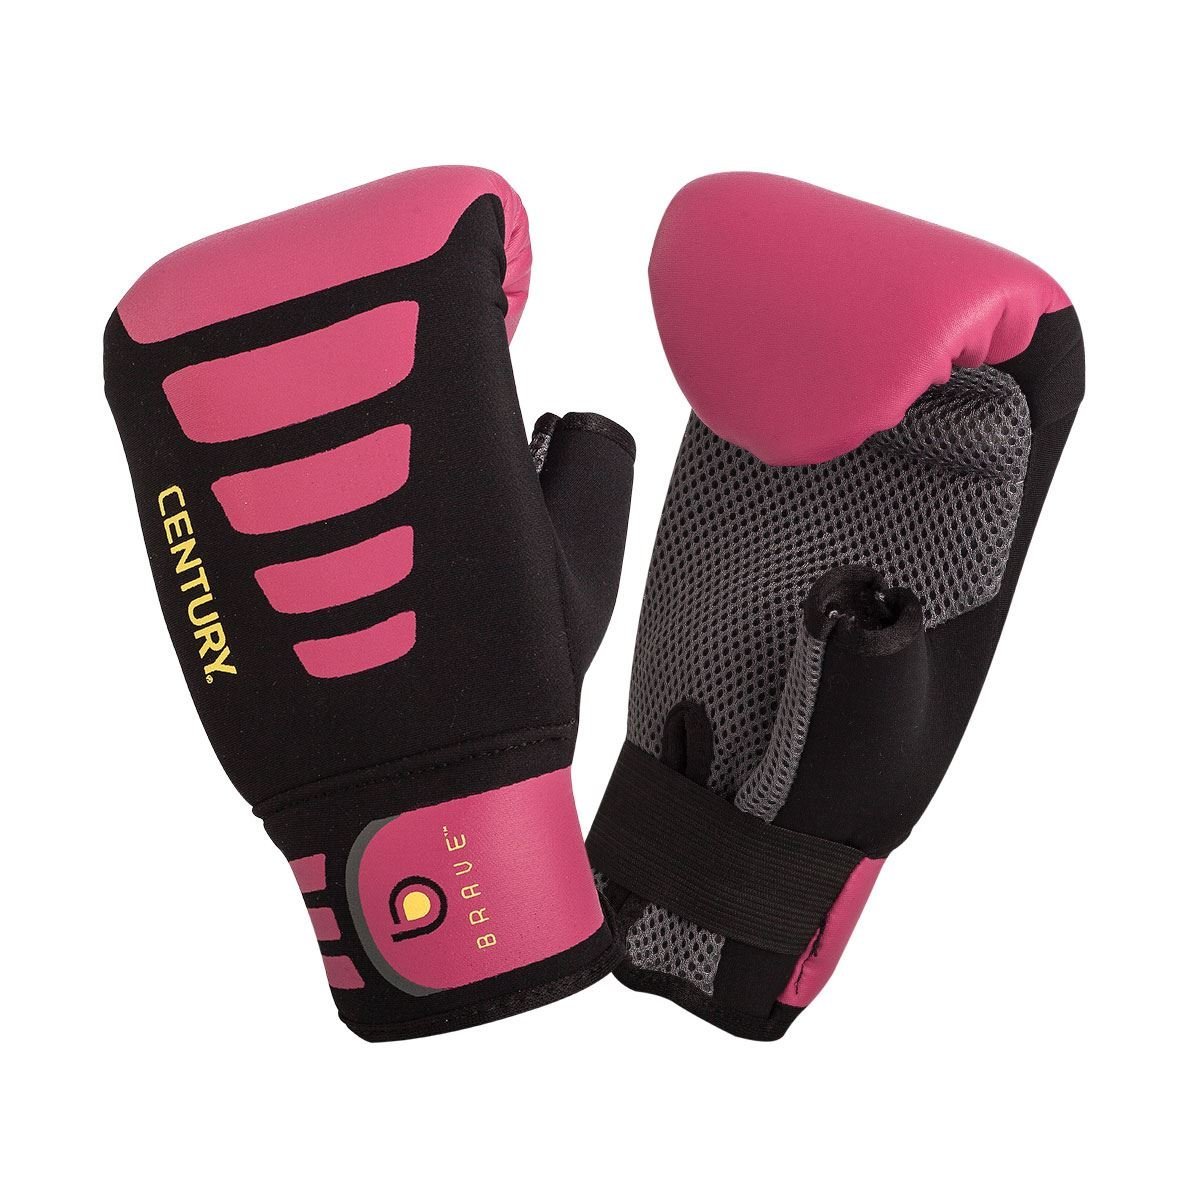 The Best Boxing Gloves for Women Reviewed – Best Punching Dummy Bag Reviews 2019